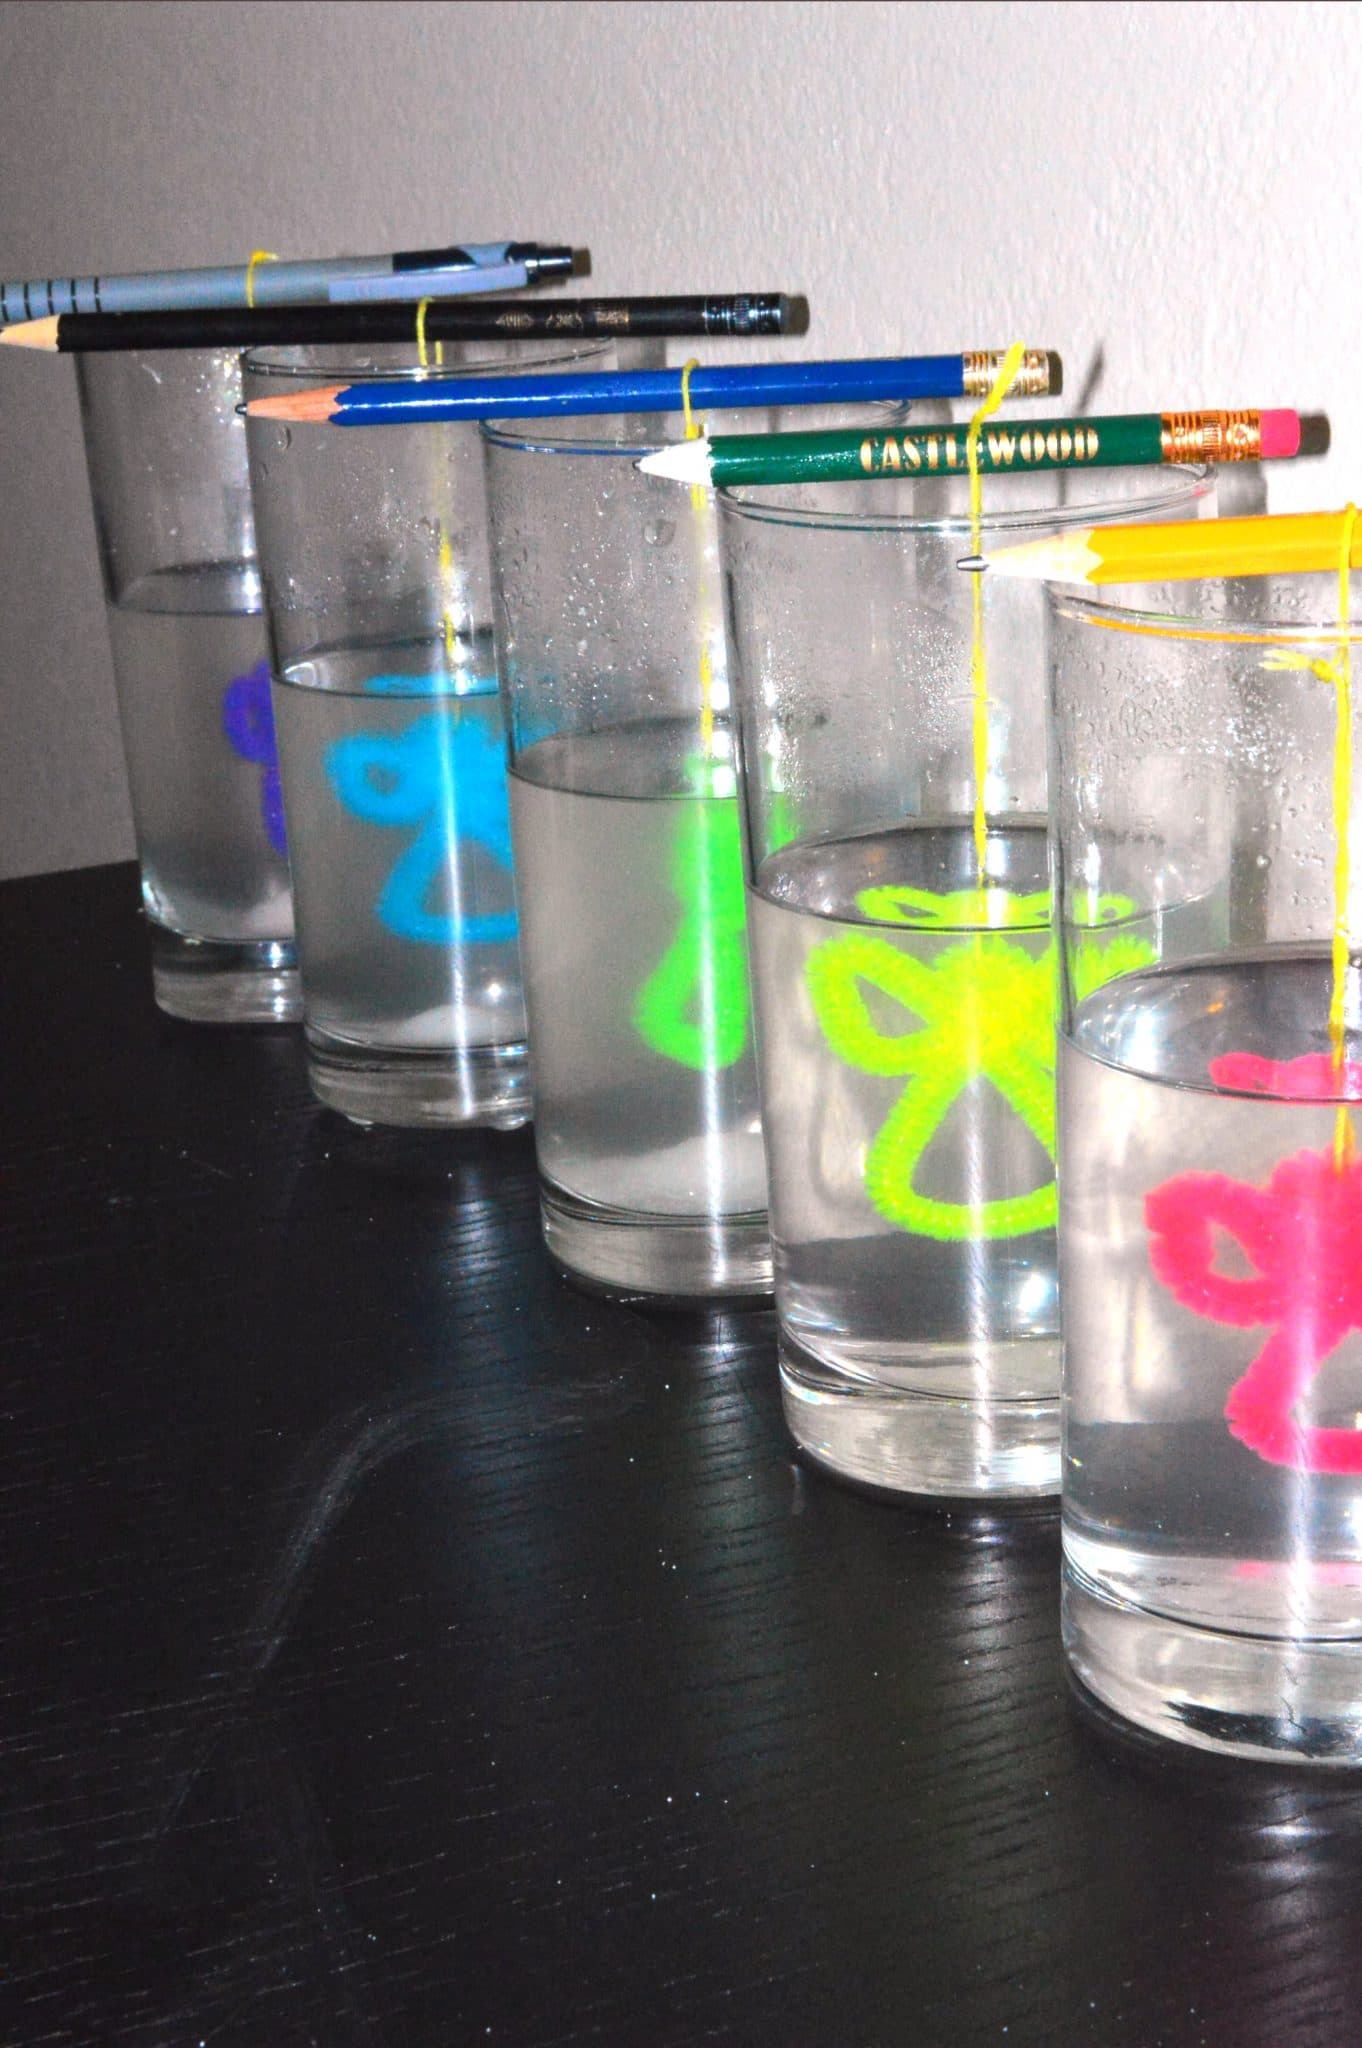 angel pipe cleaners are dangled from pencils into glasses with water